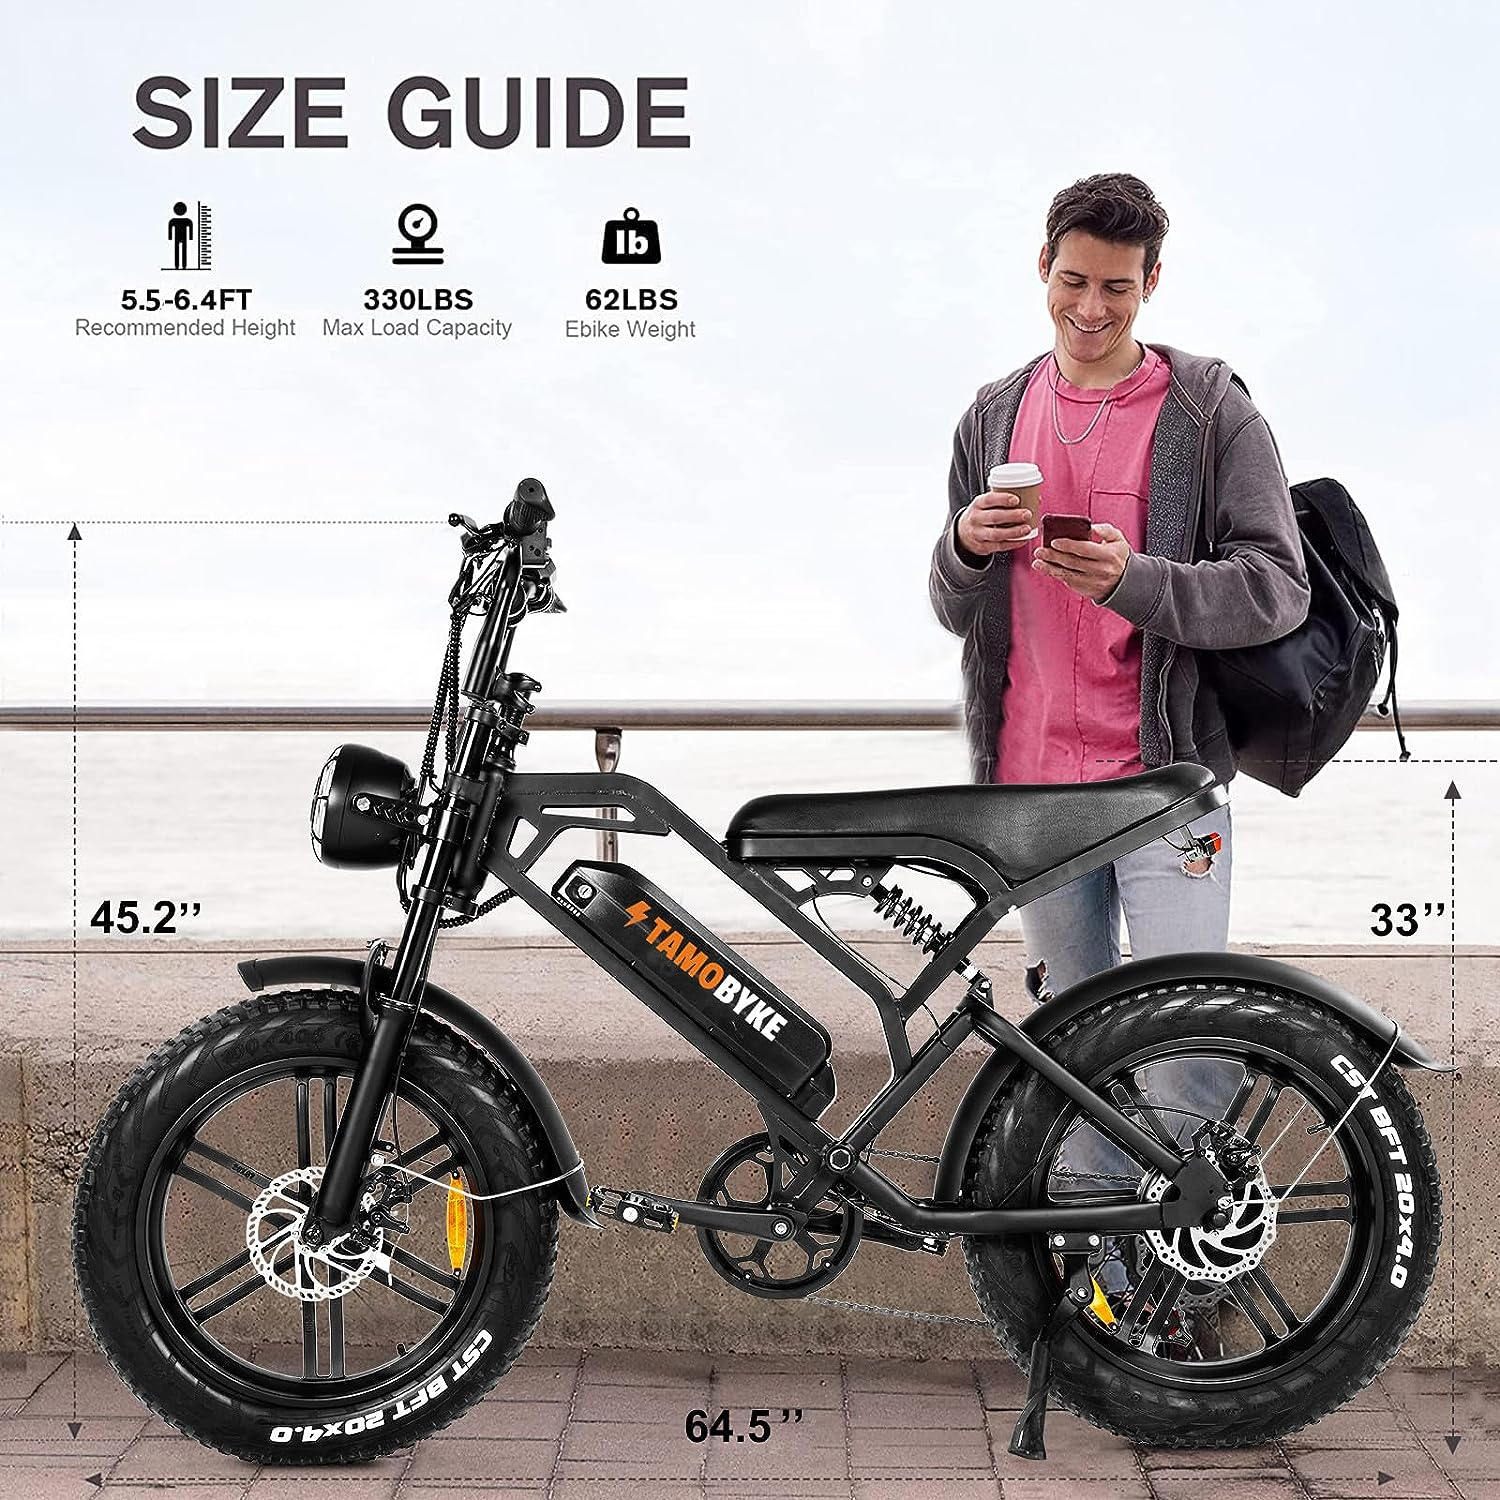 ZonDoo ZDBK02 E-bike 750W Electric Bicycle 27MPH 48V15Ah Battery with 20'' Fat Tyres